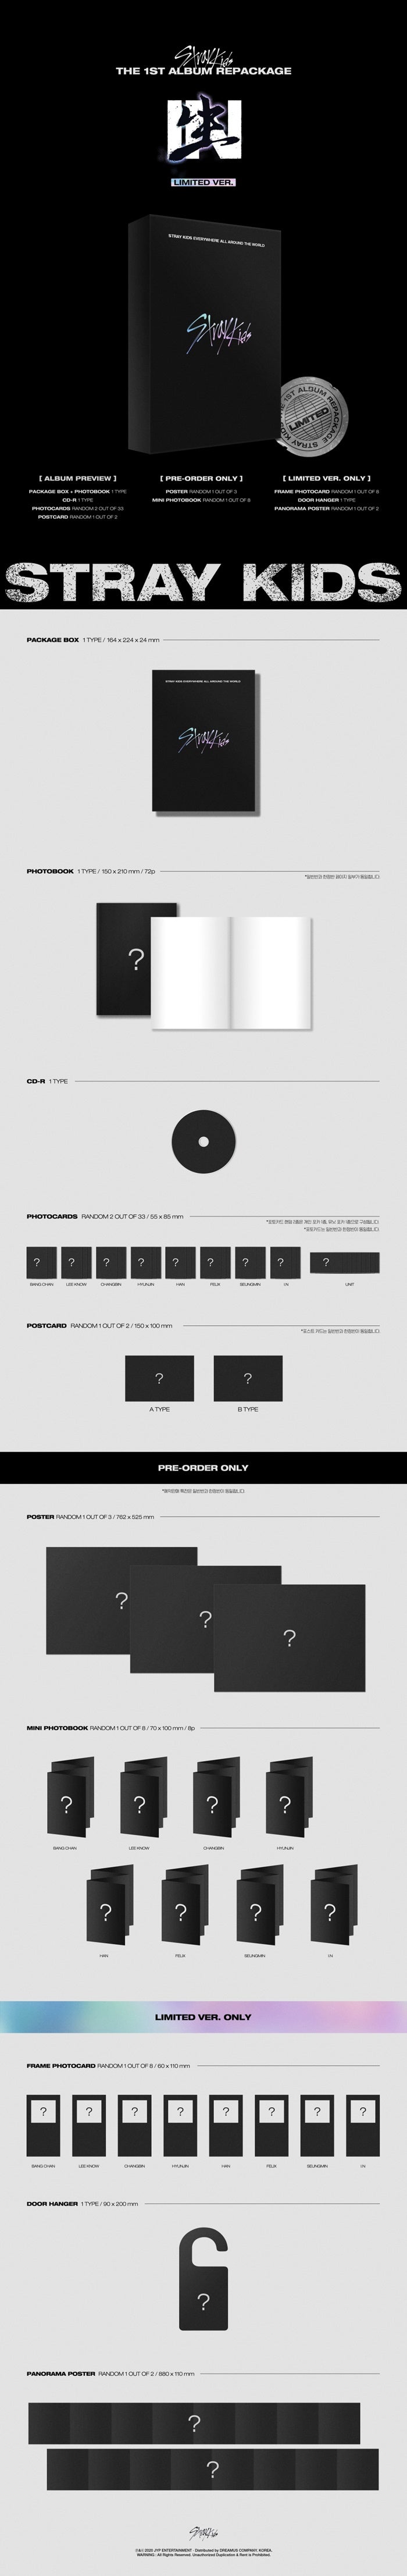 1 CD
1 Photobook (72 pages)
2 Photo Cards (random out of 33 types)
1 Post Card (random out of 2 types)
1 Frame Photo Card ...